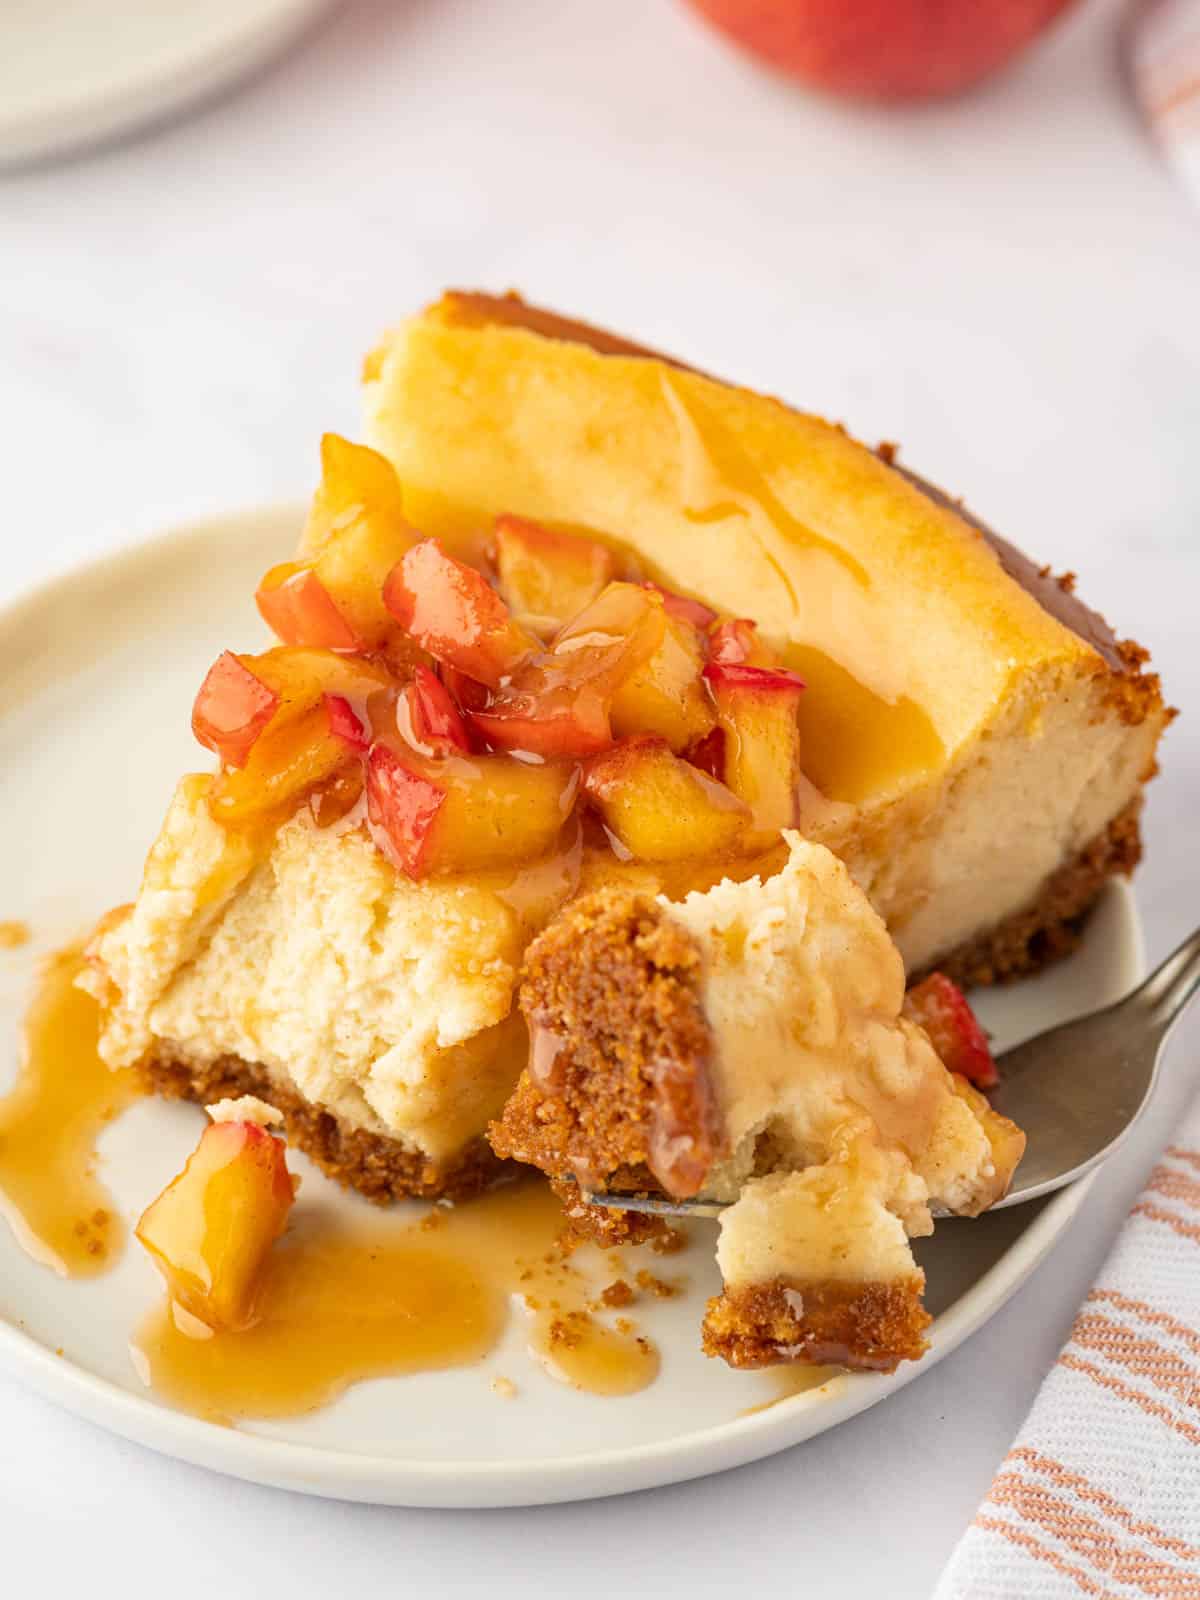 A fork cuts a bite of creamy cheesecake with apple topping.